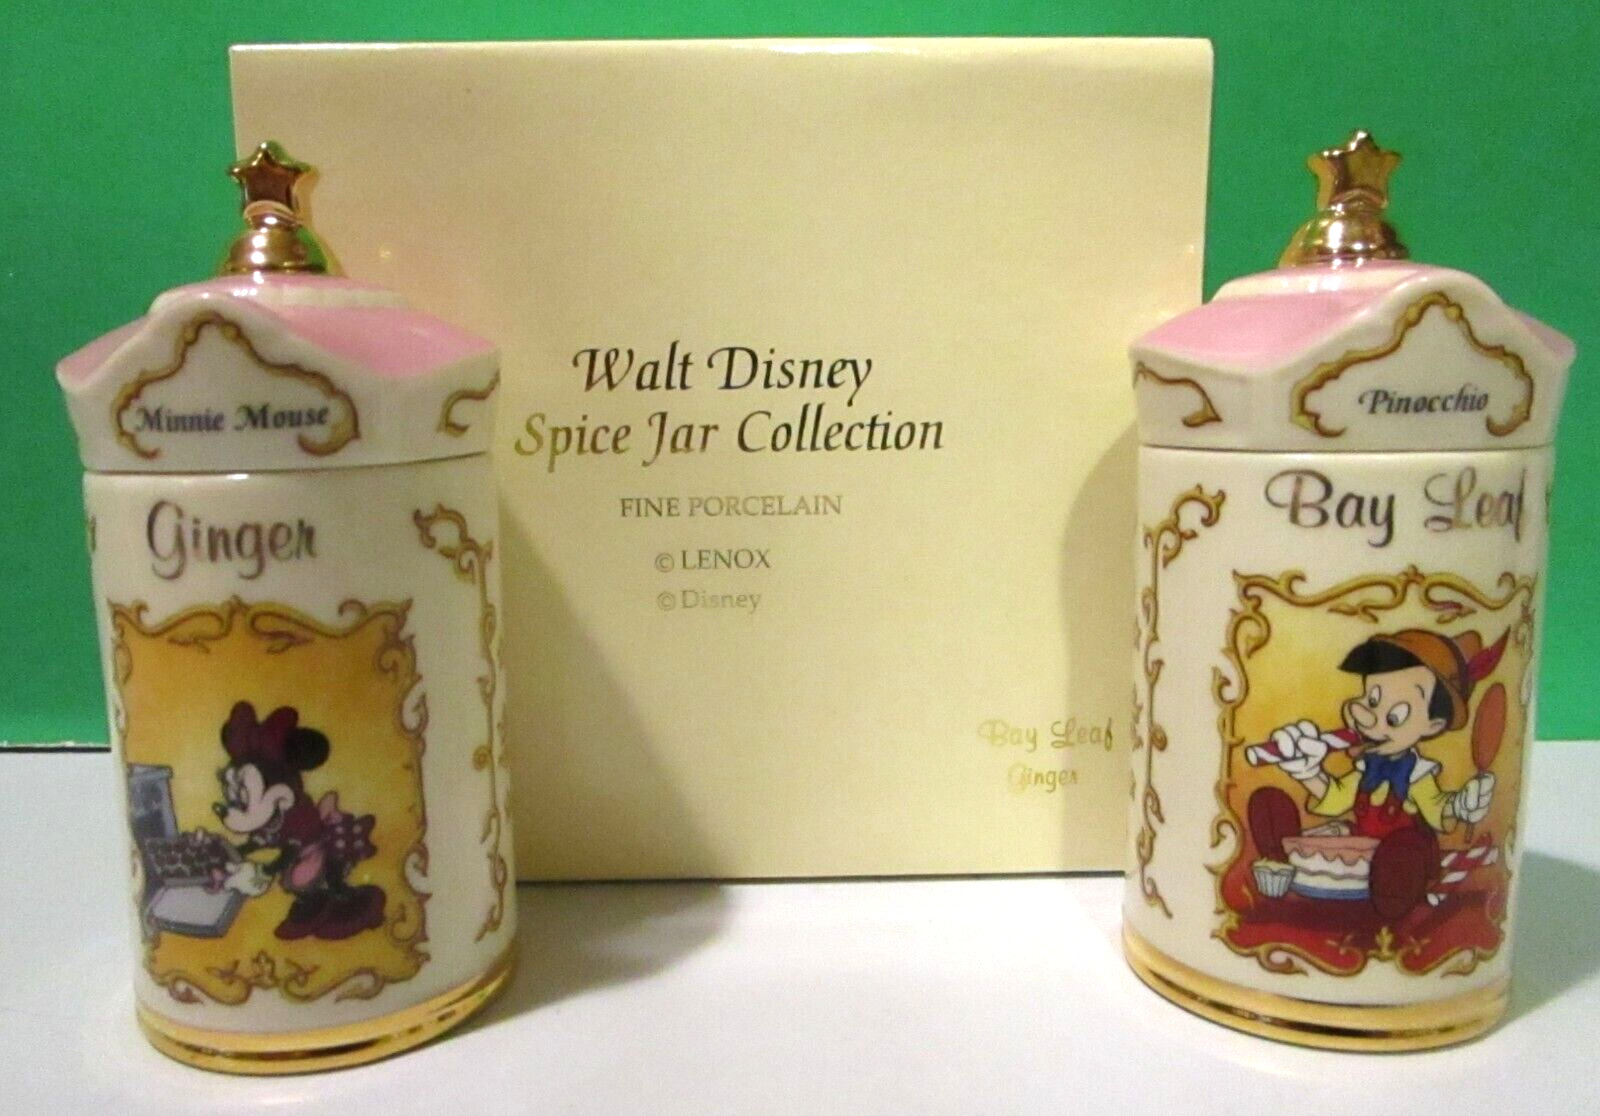 LENOX Disney SPICE JARS - MINNIE Mouse Ginger - PINOCCHIO BAY LEAF -  NEW in BOX